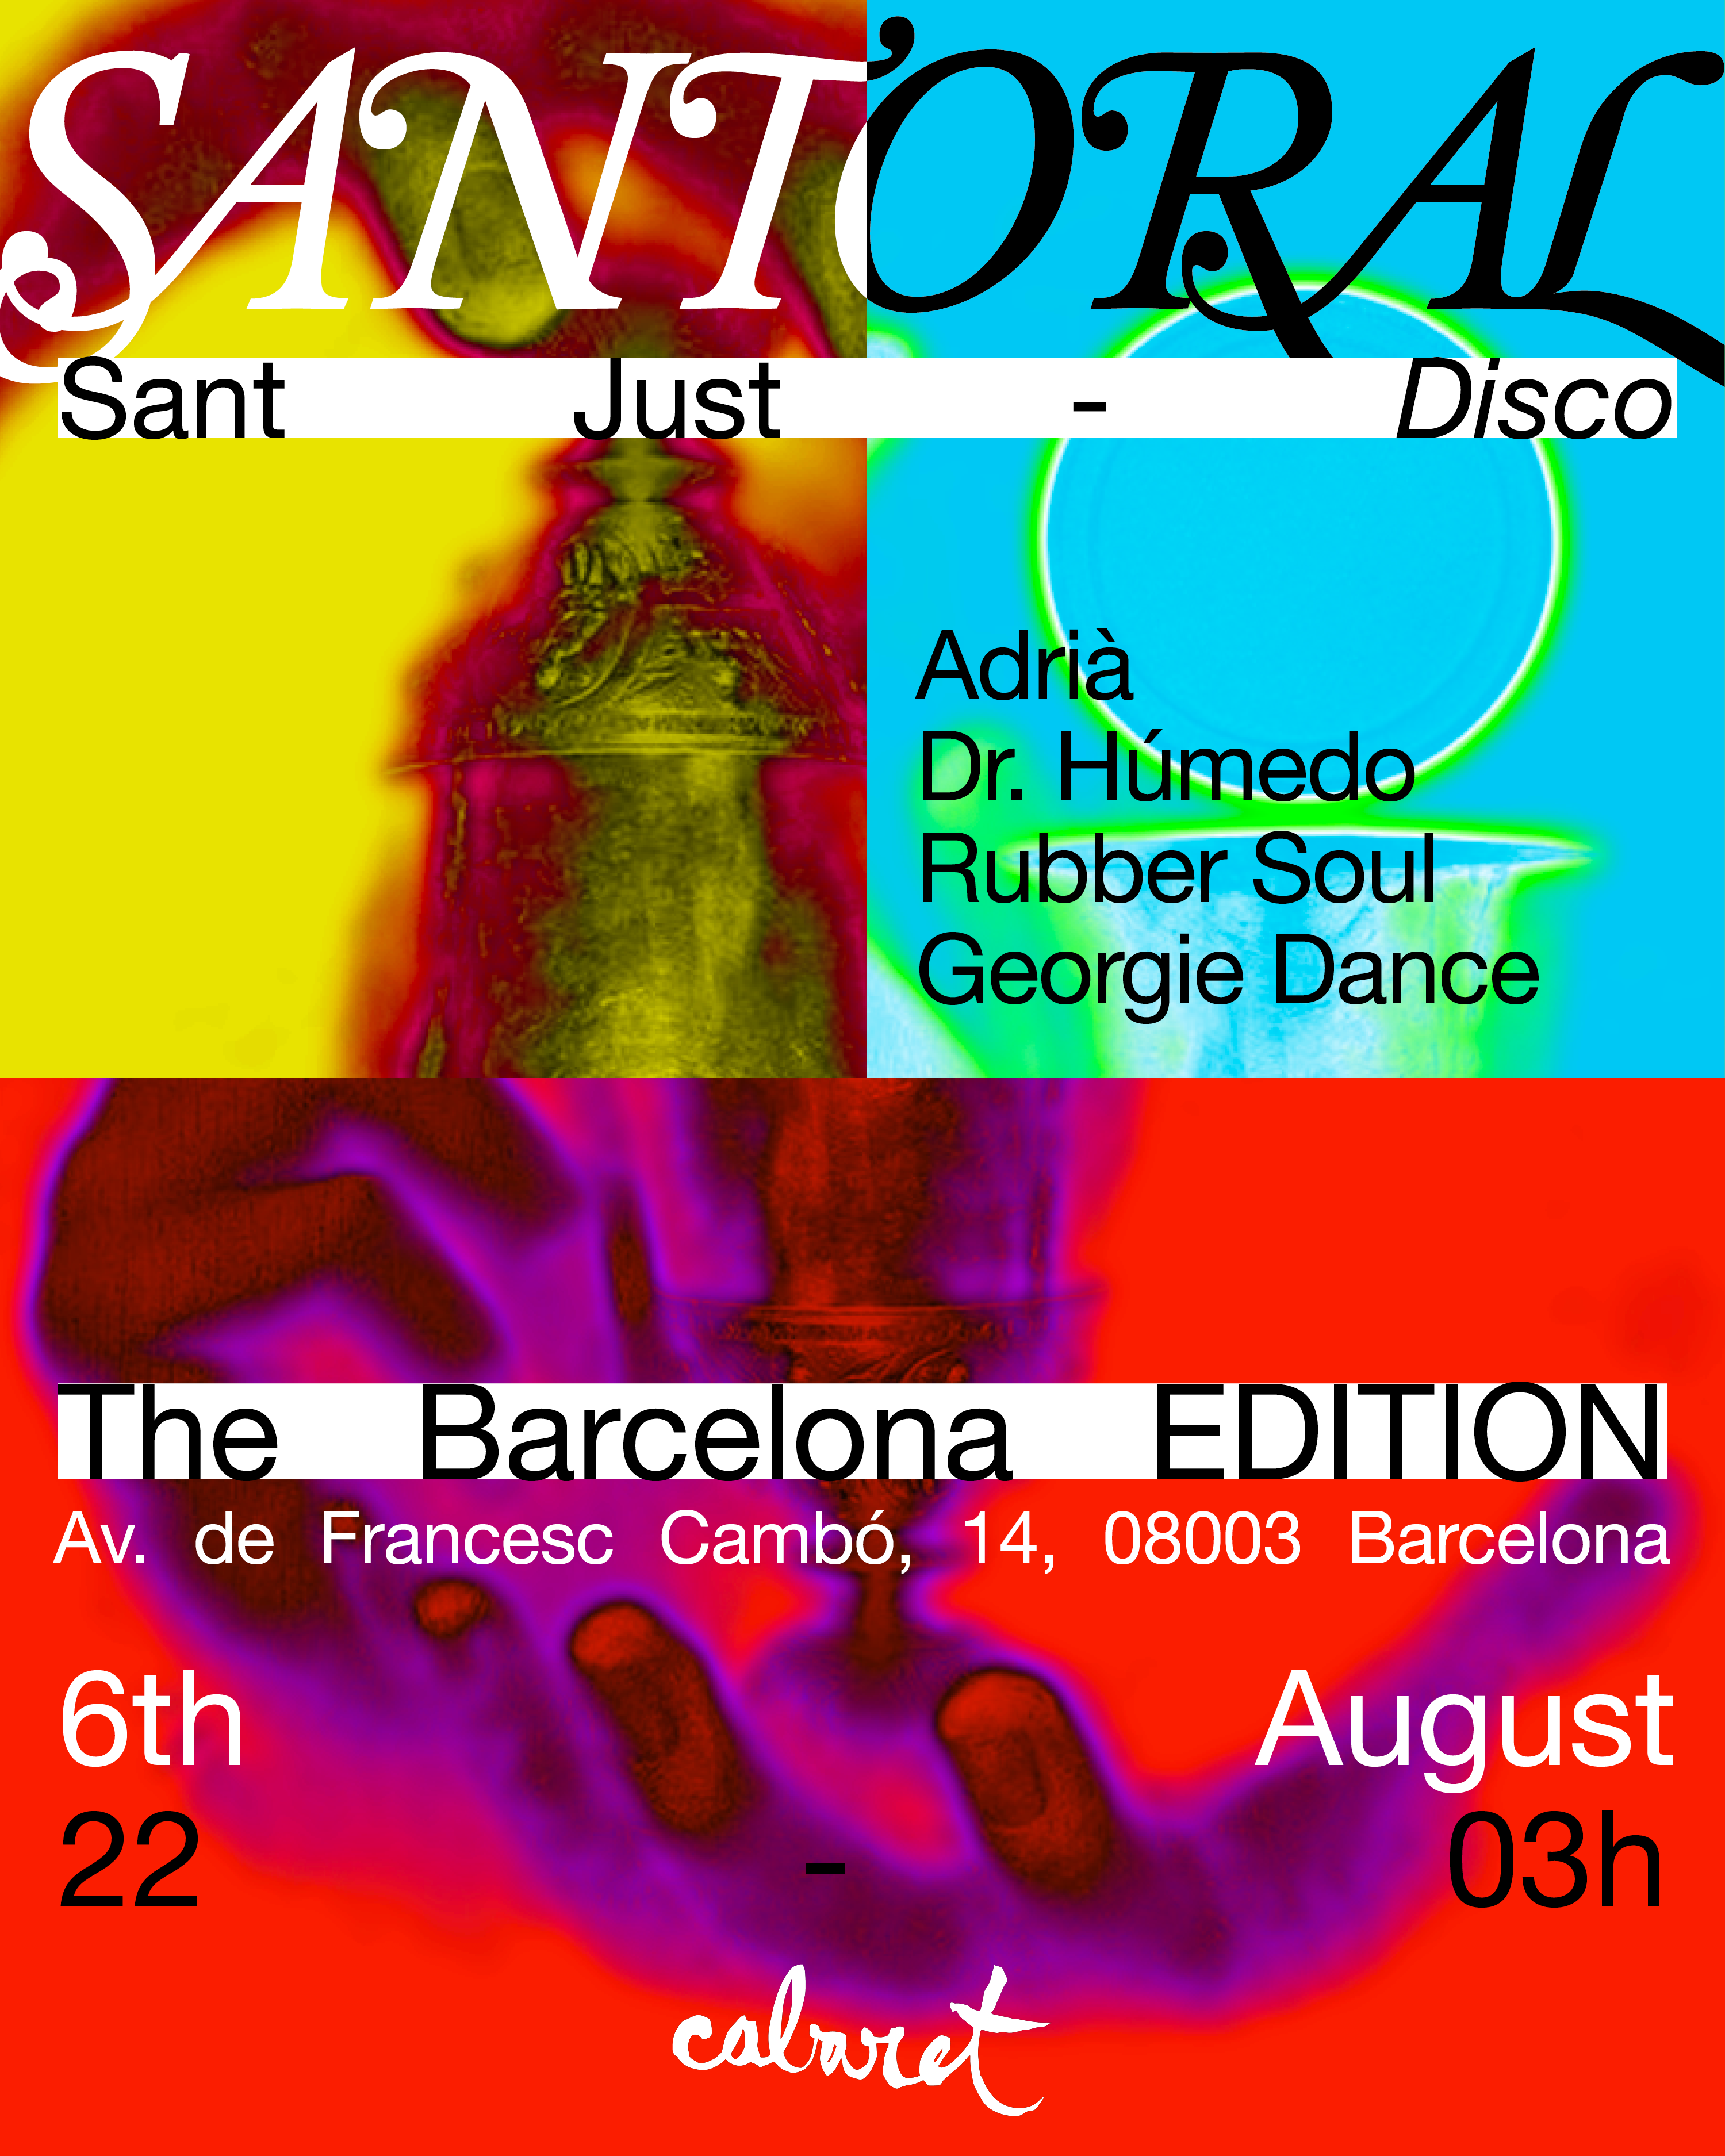 Sant Just, disco by Santoral - Flyer front